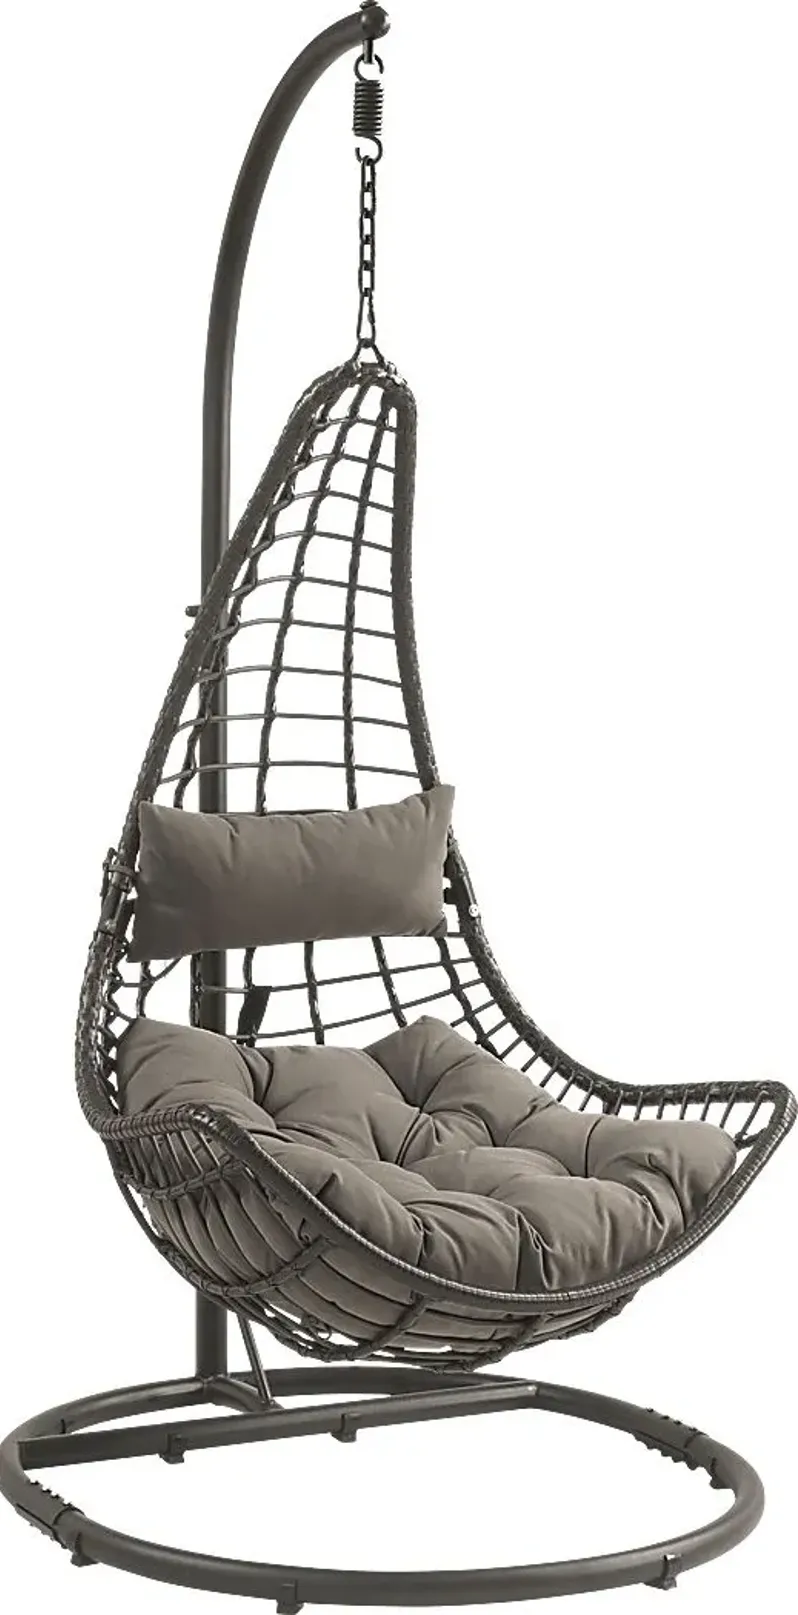 Outdoor Ashayla Charcoal Hanging Chair